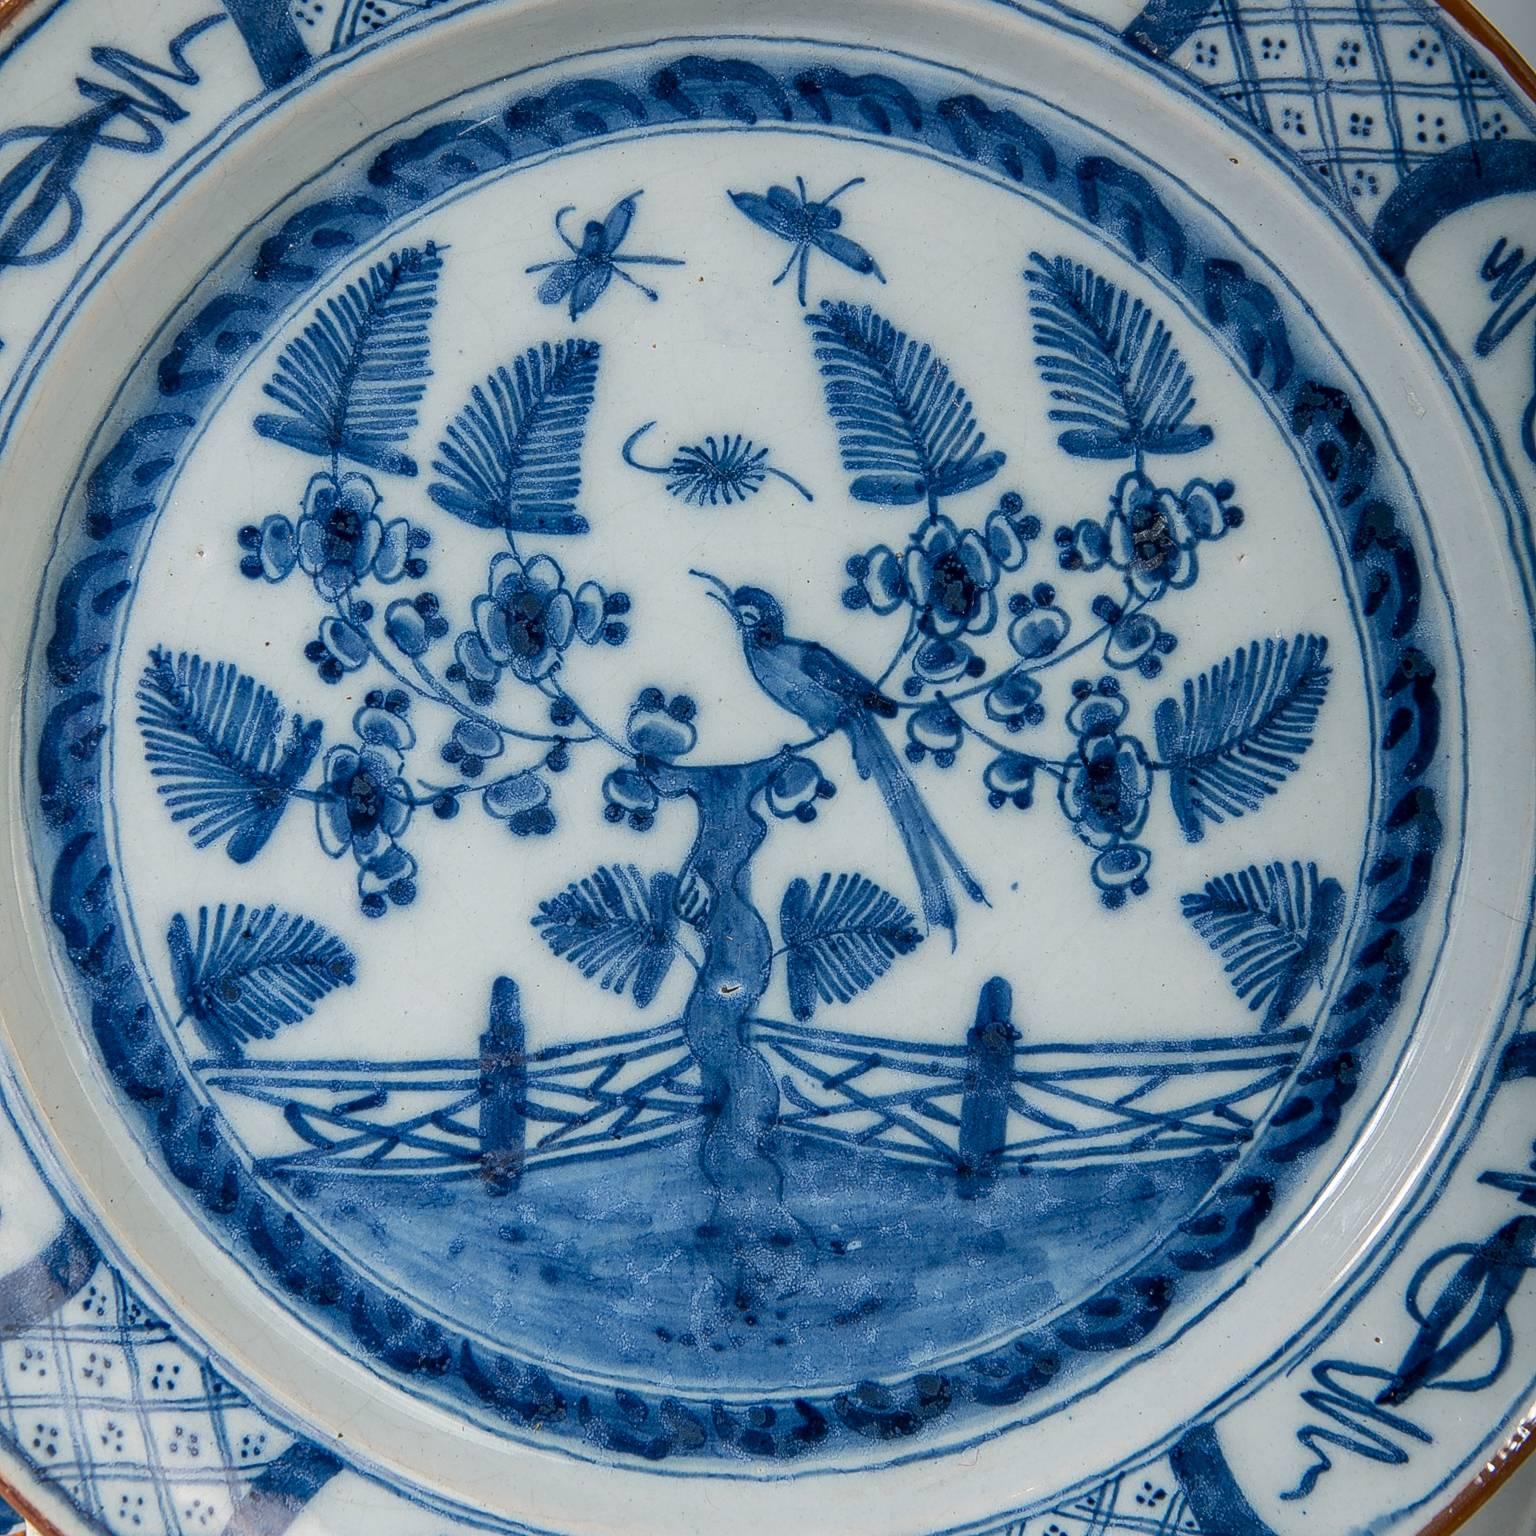 A pair of 18th century Dutch delft blue and white chargers decorated with a garden scene with a song bird perched in a flowering tree and butterflies flying above the garden.
The border is decorated with diamonds alternating with chinoiserie